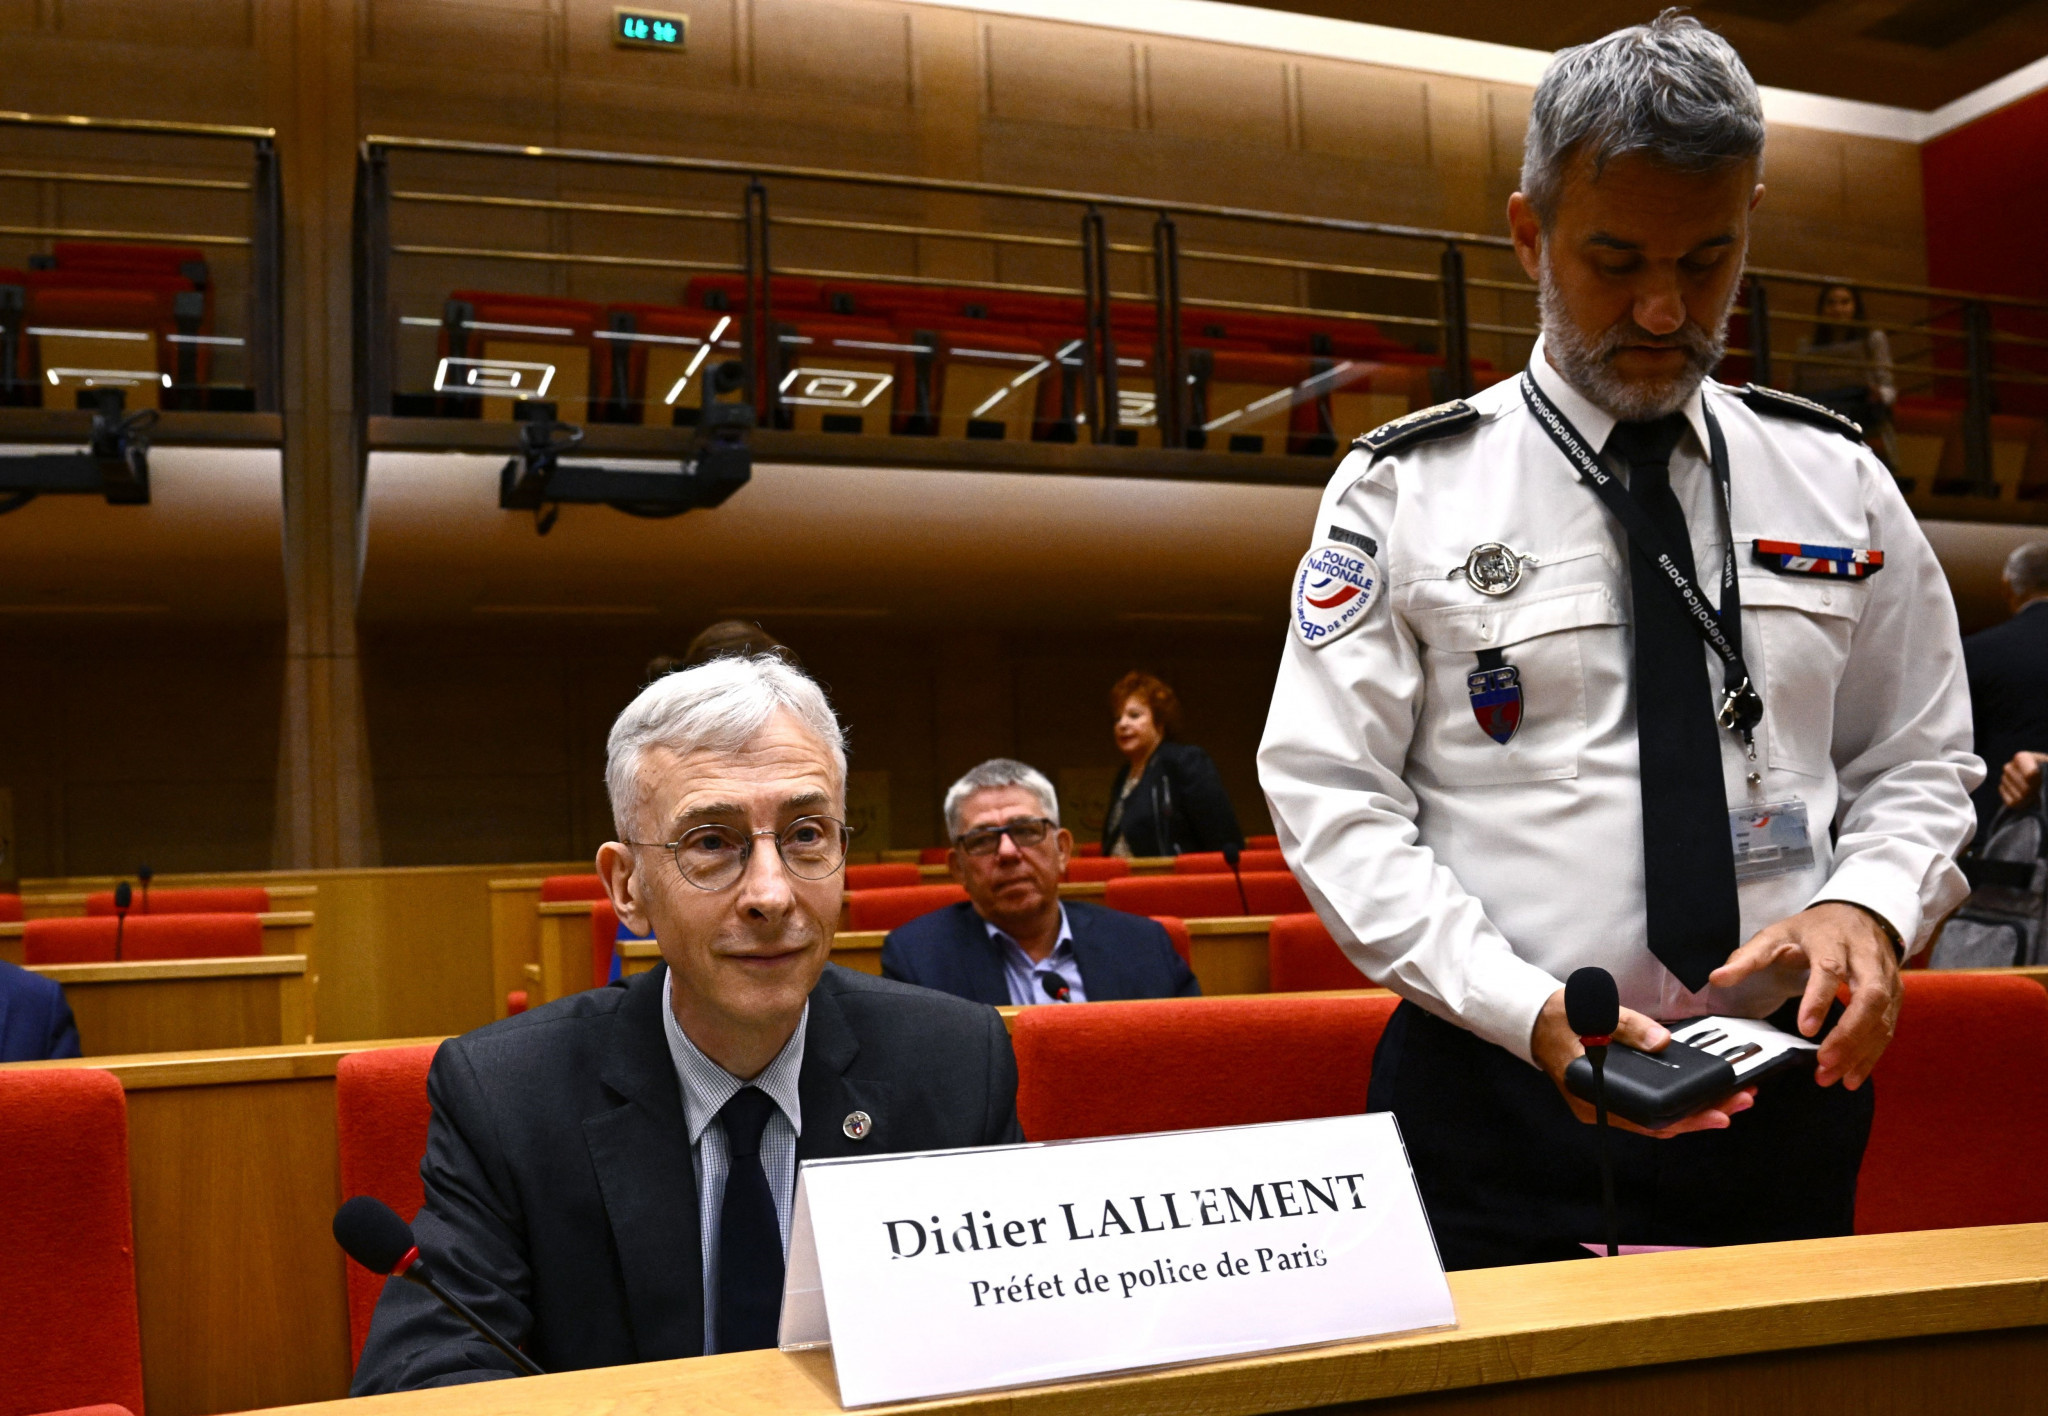 Paris police chief Didier Lallement attends a hearing at the French Senate ©Getty Images